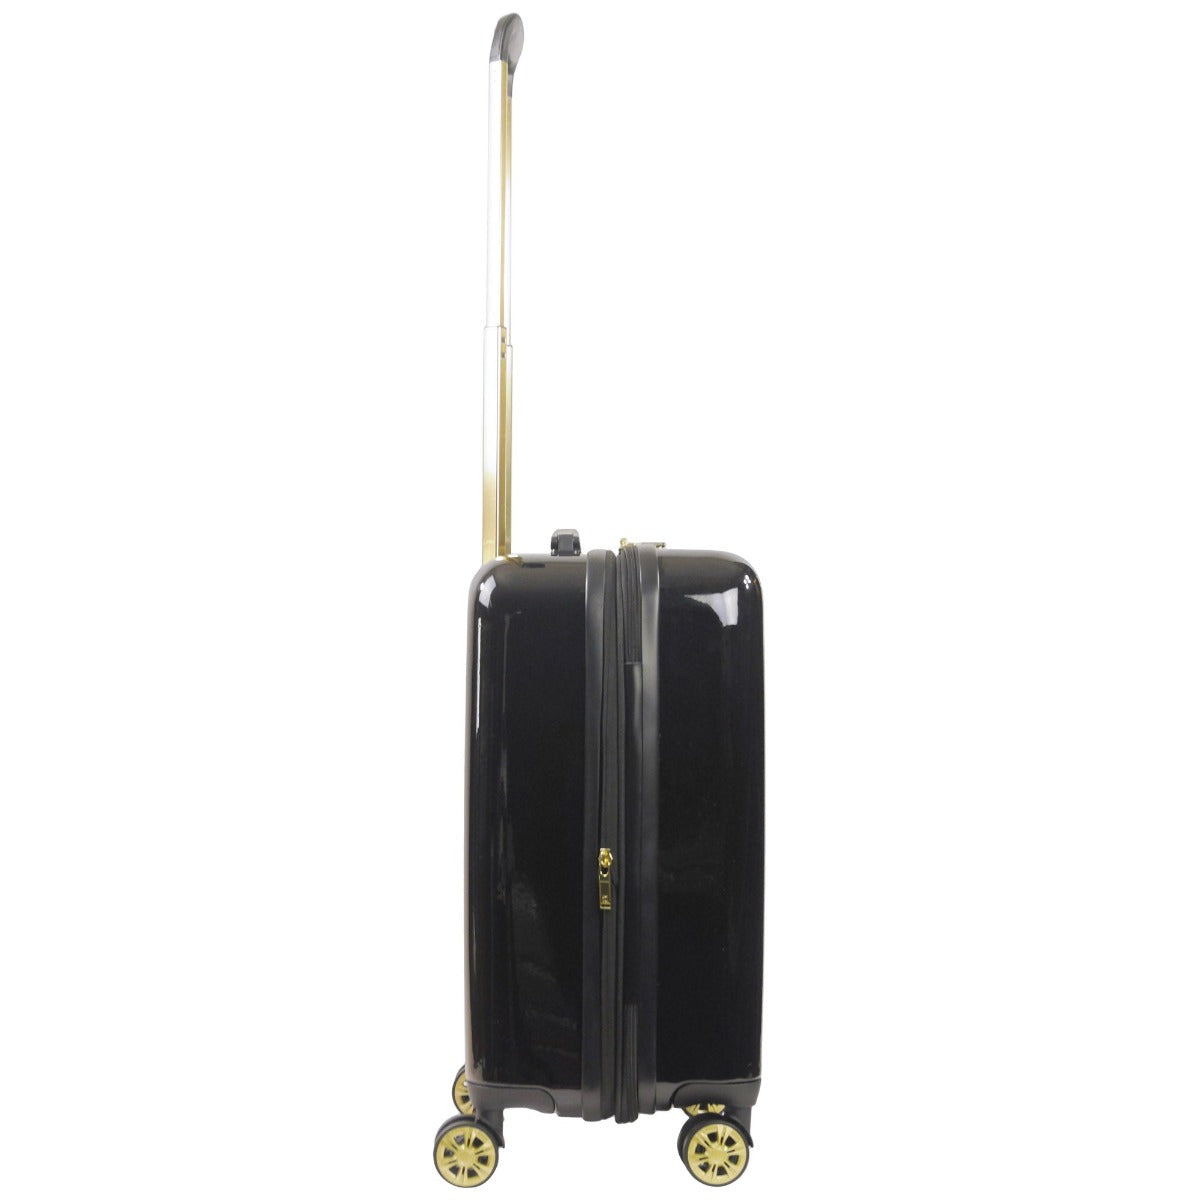 Ful Groove 22 inch carry-on hardside degree spinner suitcase Black luggage gold details